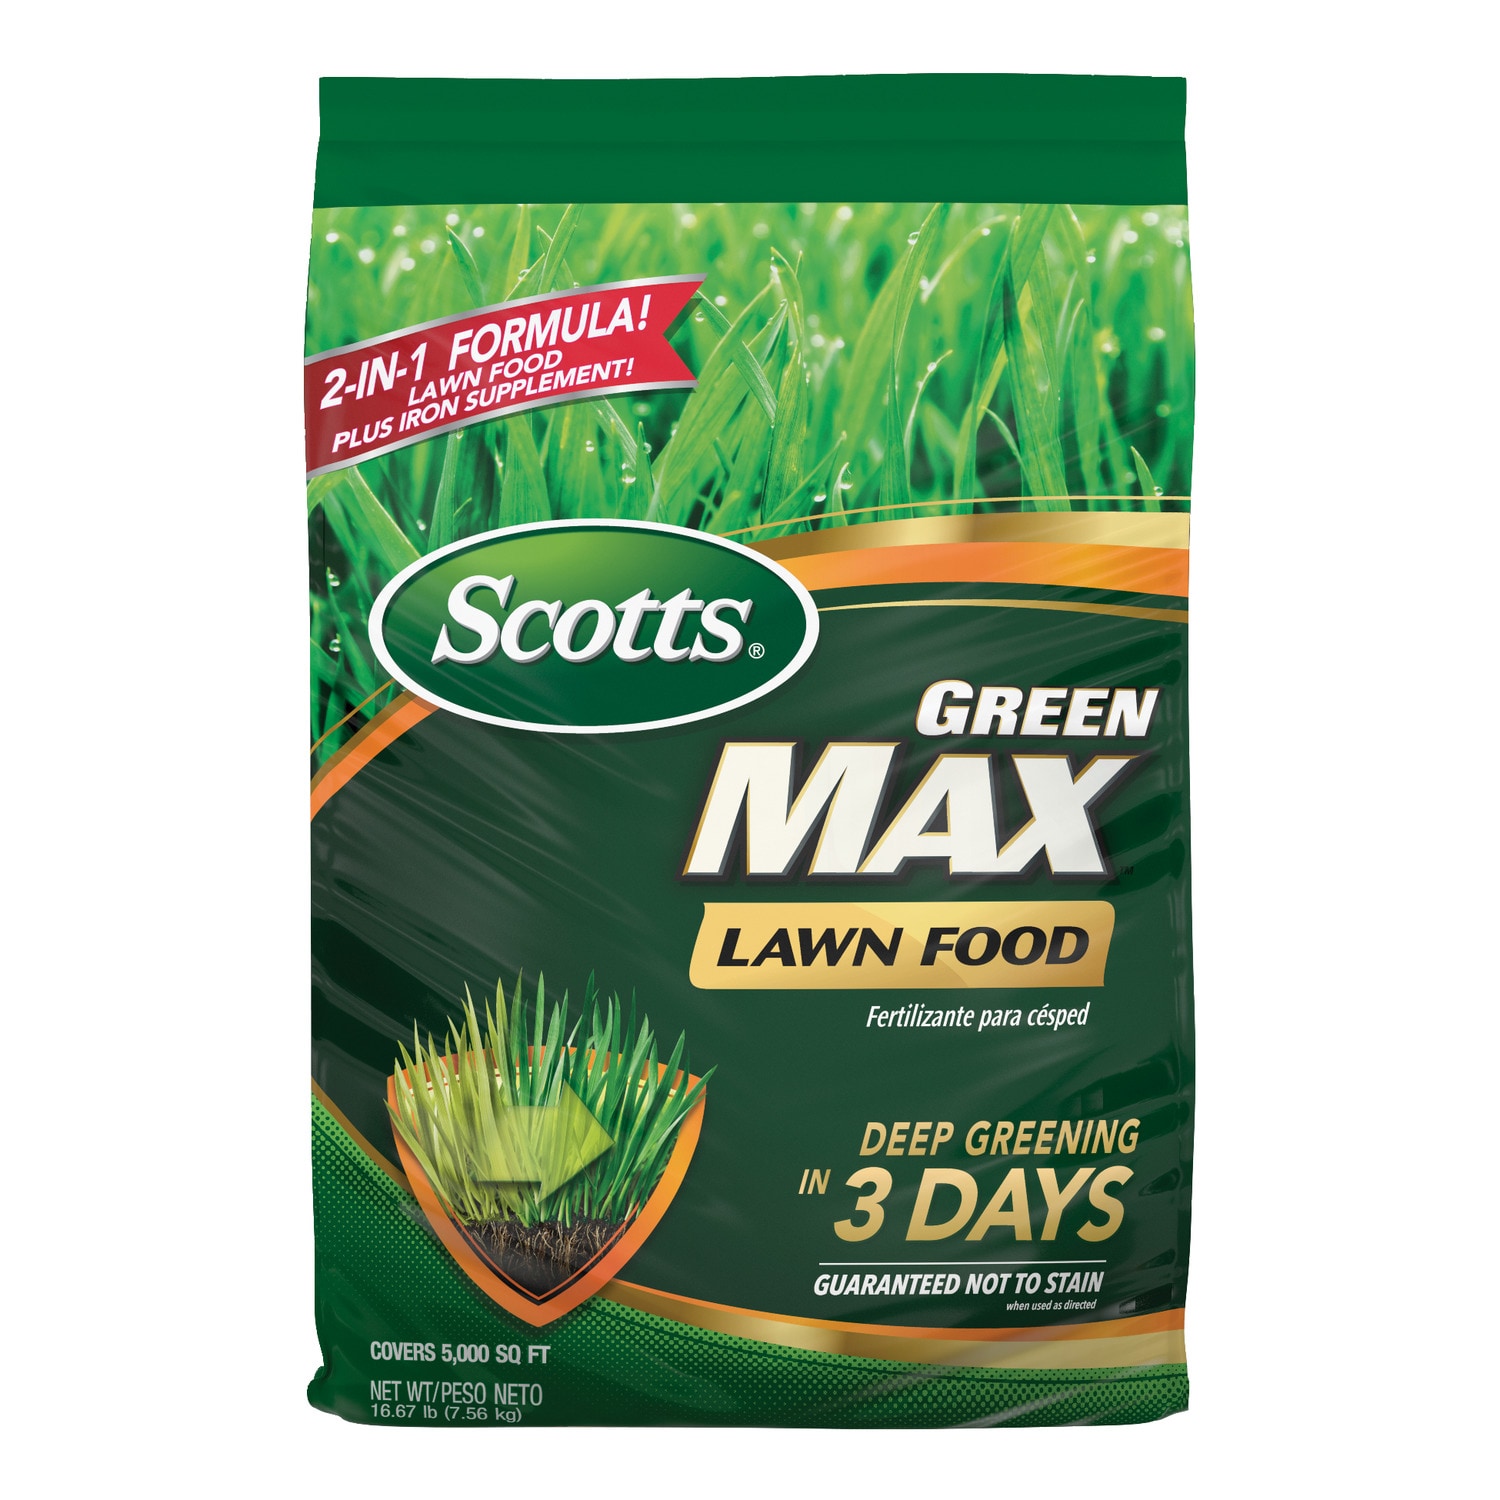 Scott Green Max Lawn Food: The Key to a Lush and Healthy Lawn